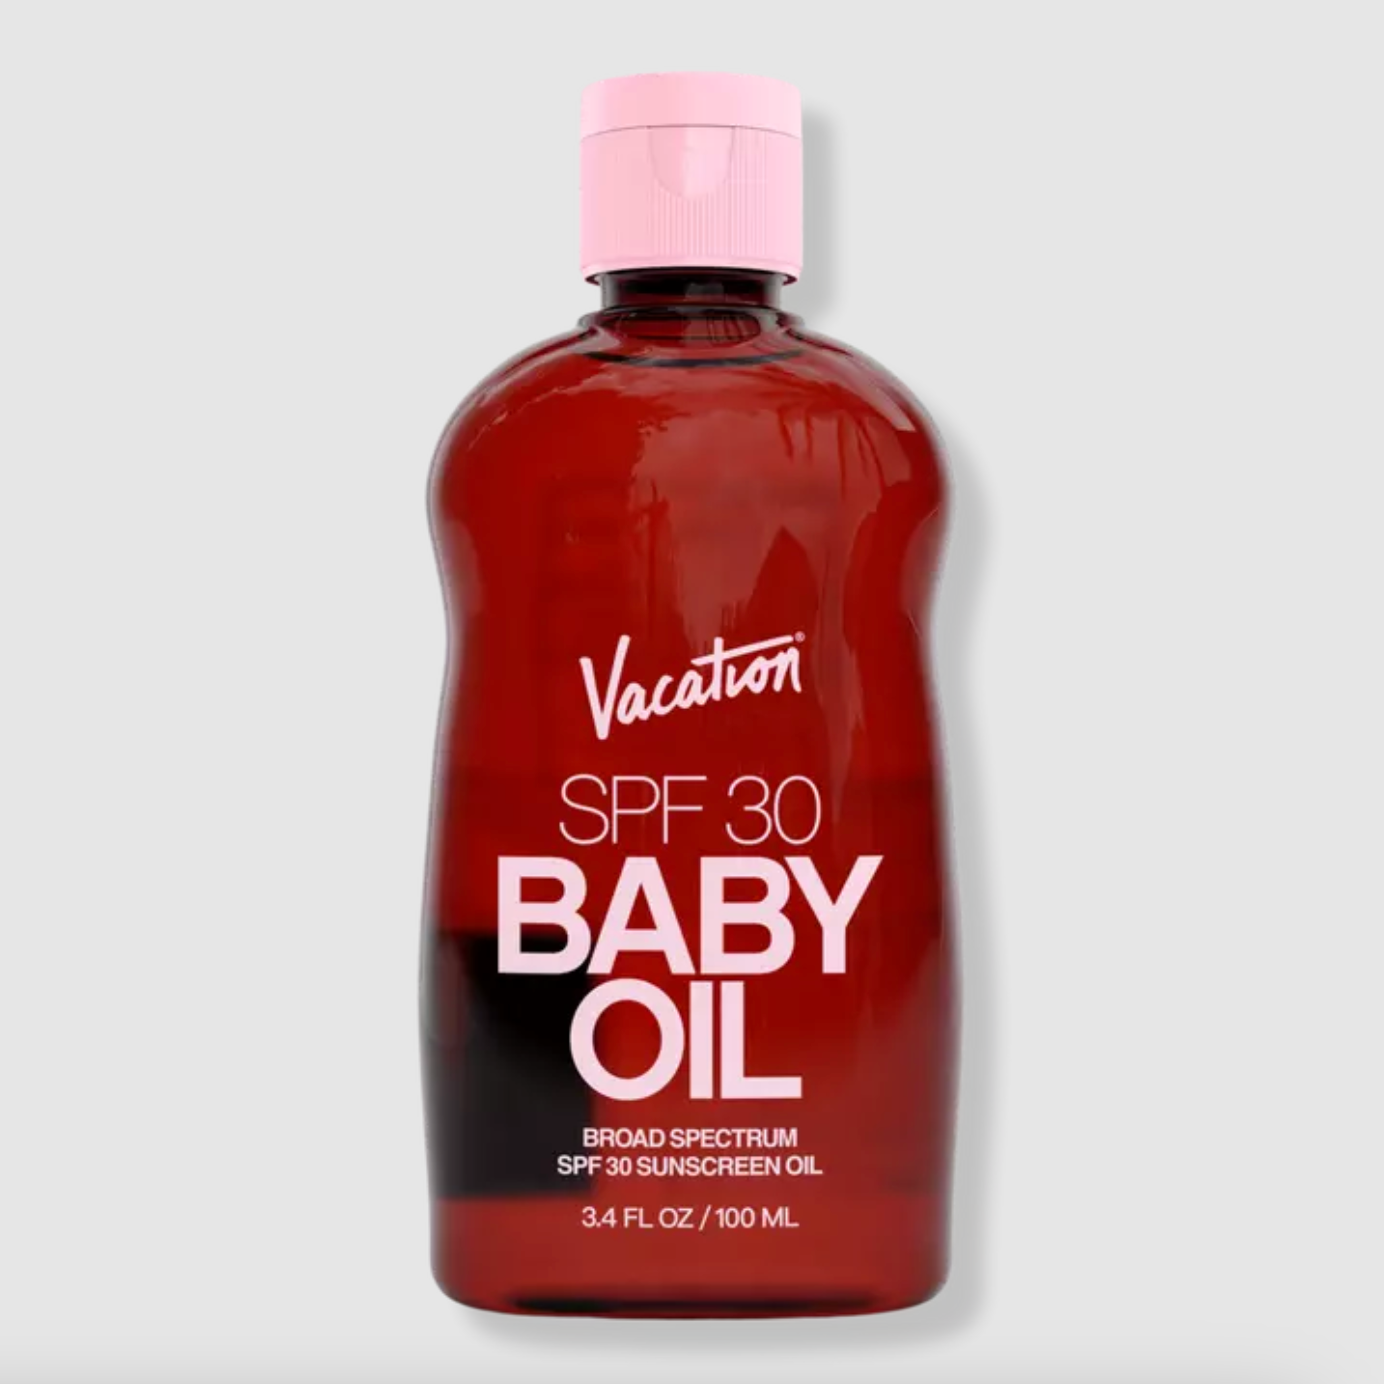 amber musk with baby oil｜TikTok Search